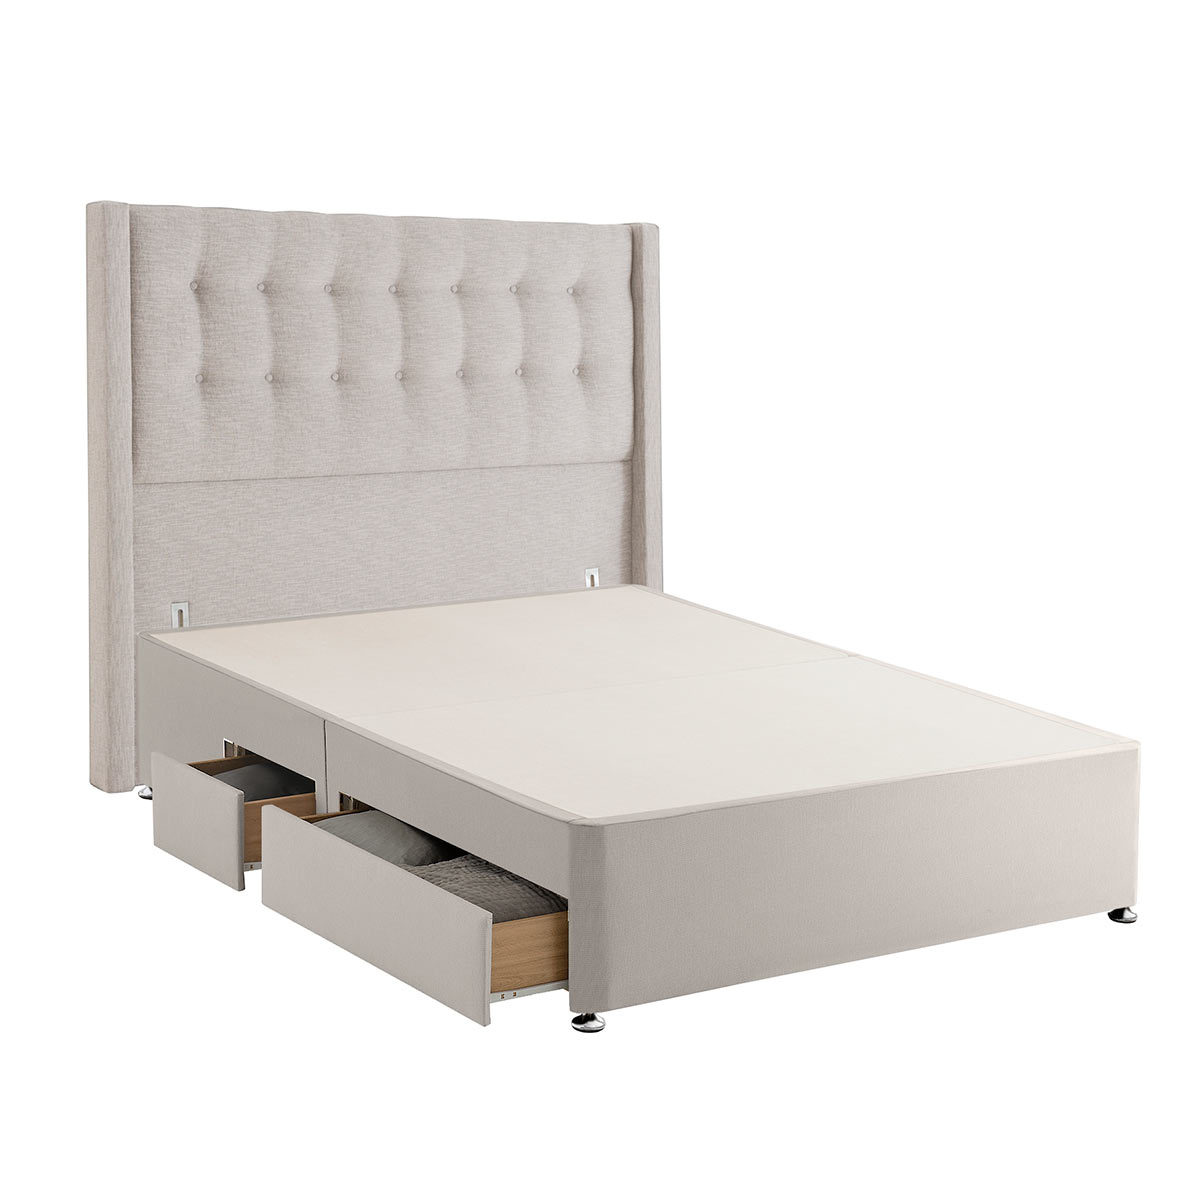 Silentnight Continental Divan Base with Bloomsbury Headboard in Dove Grey, King Size